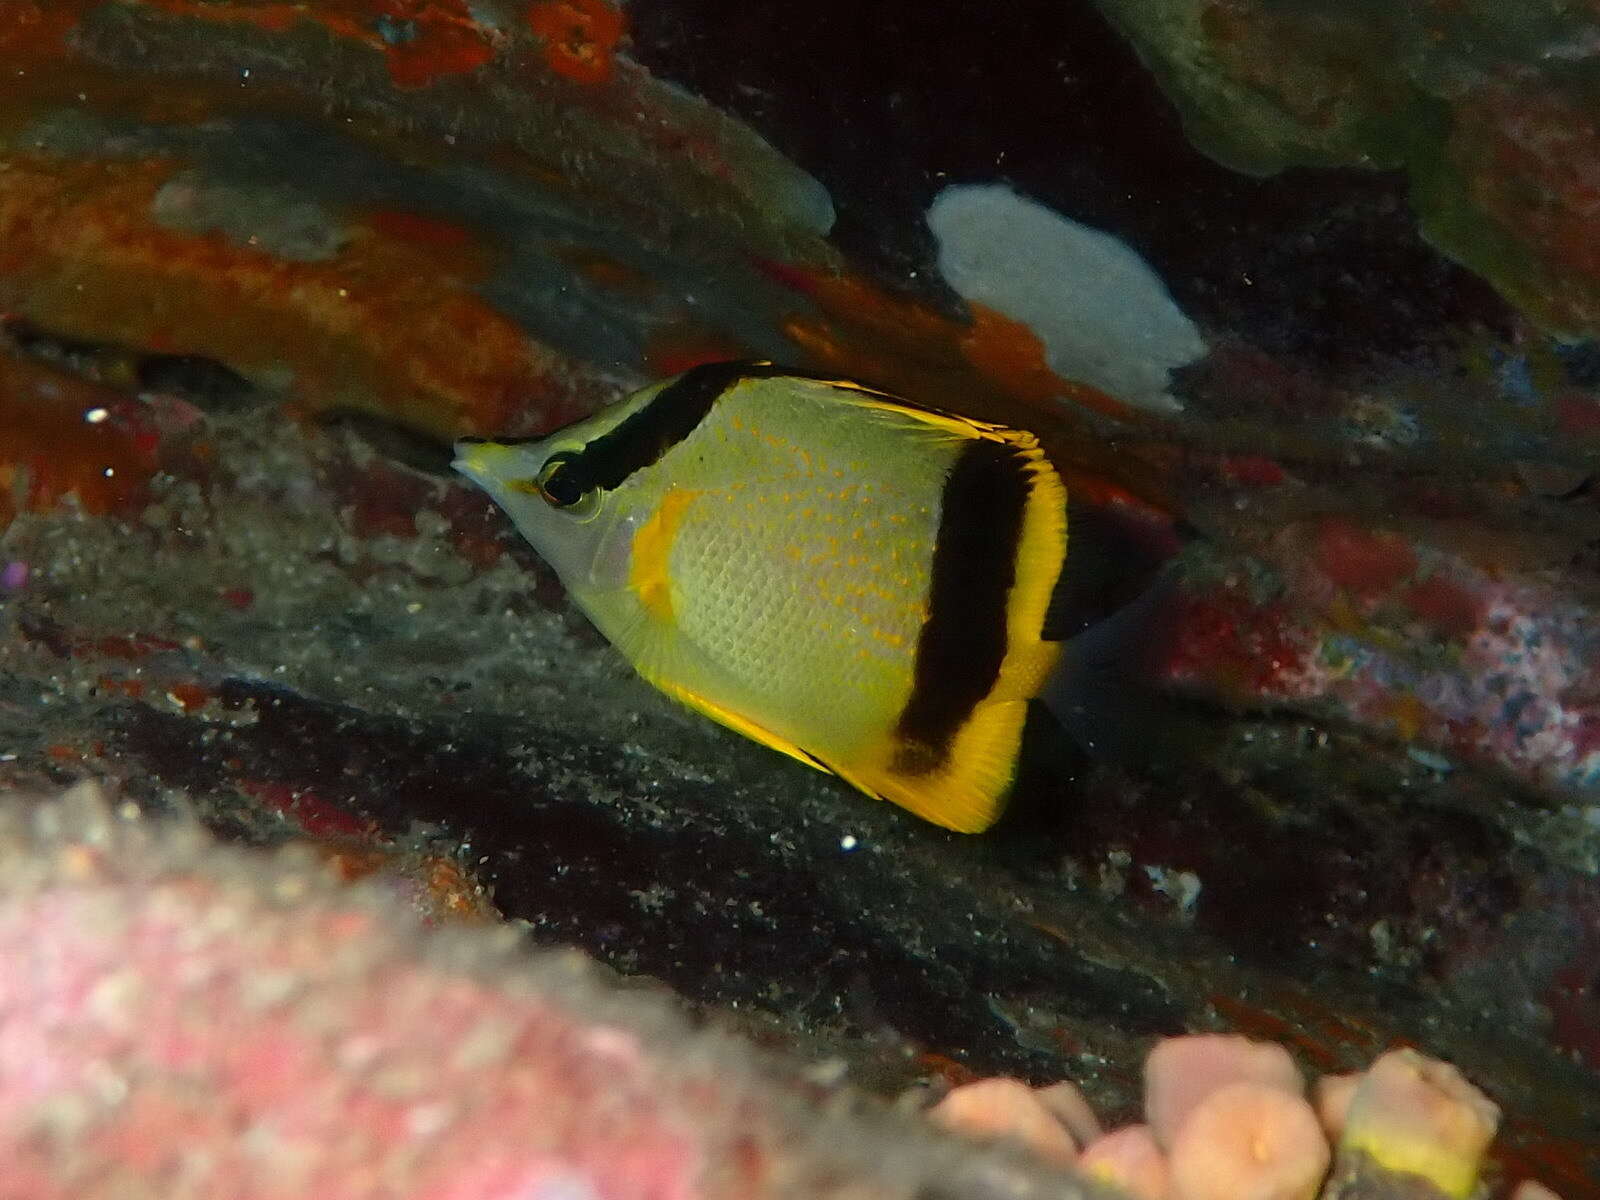 Image of French butterflyfish